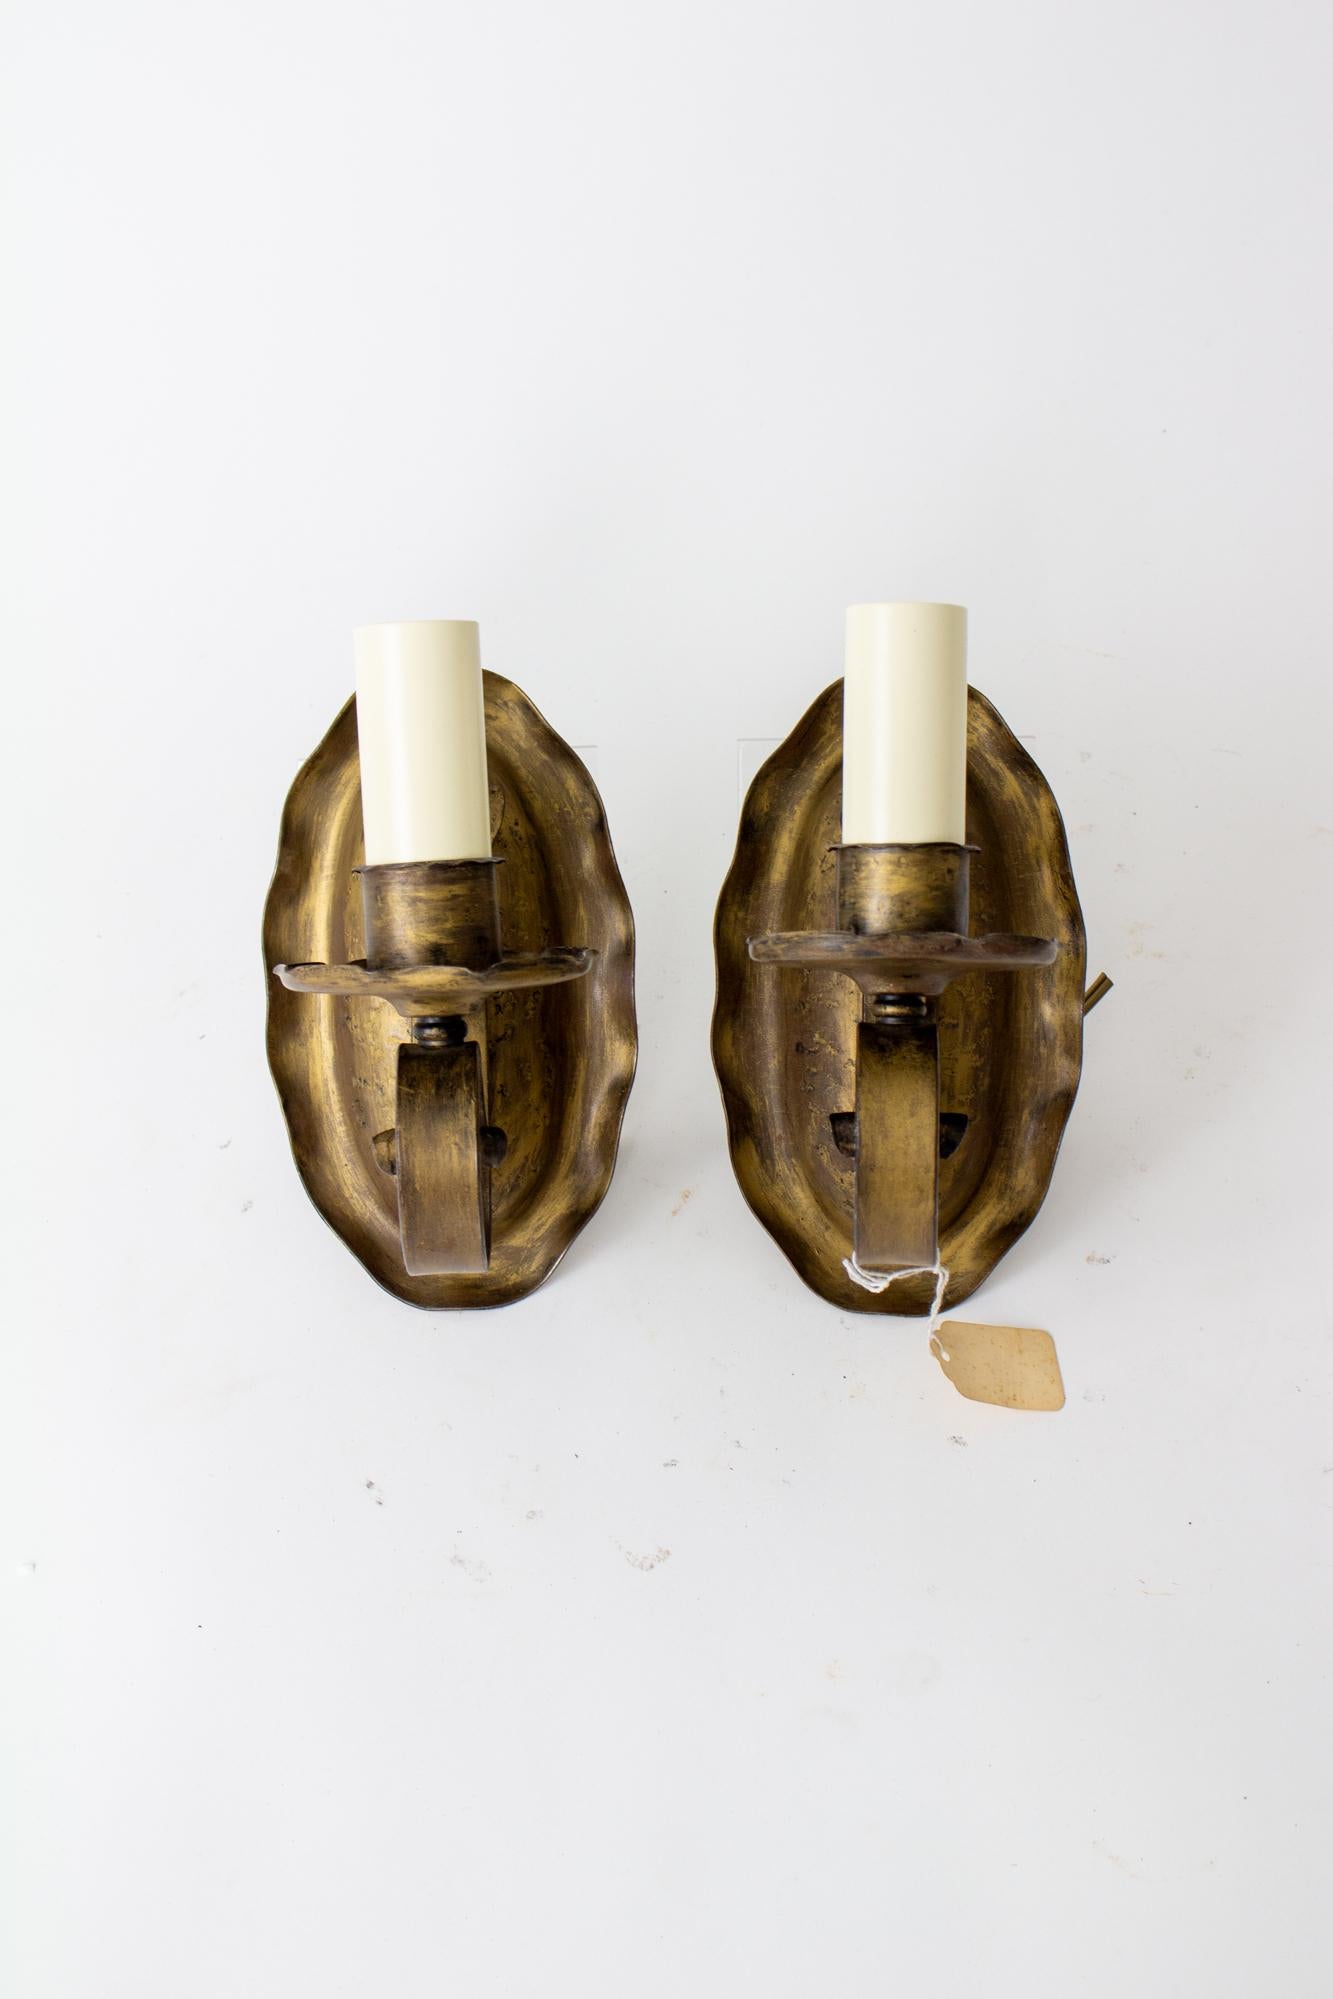 Early 20th century antique gold oval sconces, a pair. Metal sconces with the original black with antiqued gold wash finish. Single curved arm, Oval backplate with a ruffled edge. Rewired with new candlecovers, complete and ready for installation.